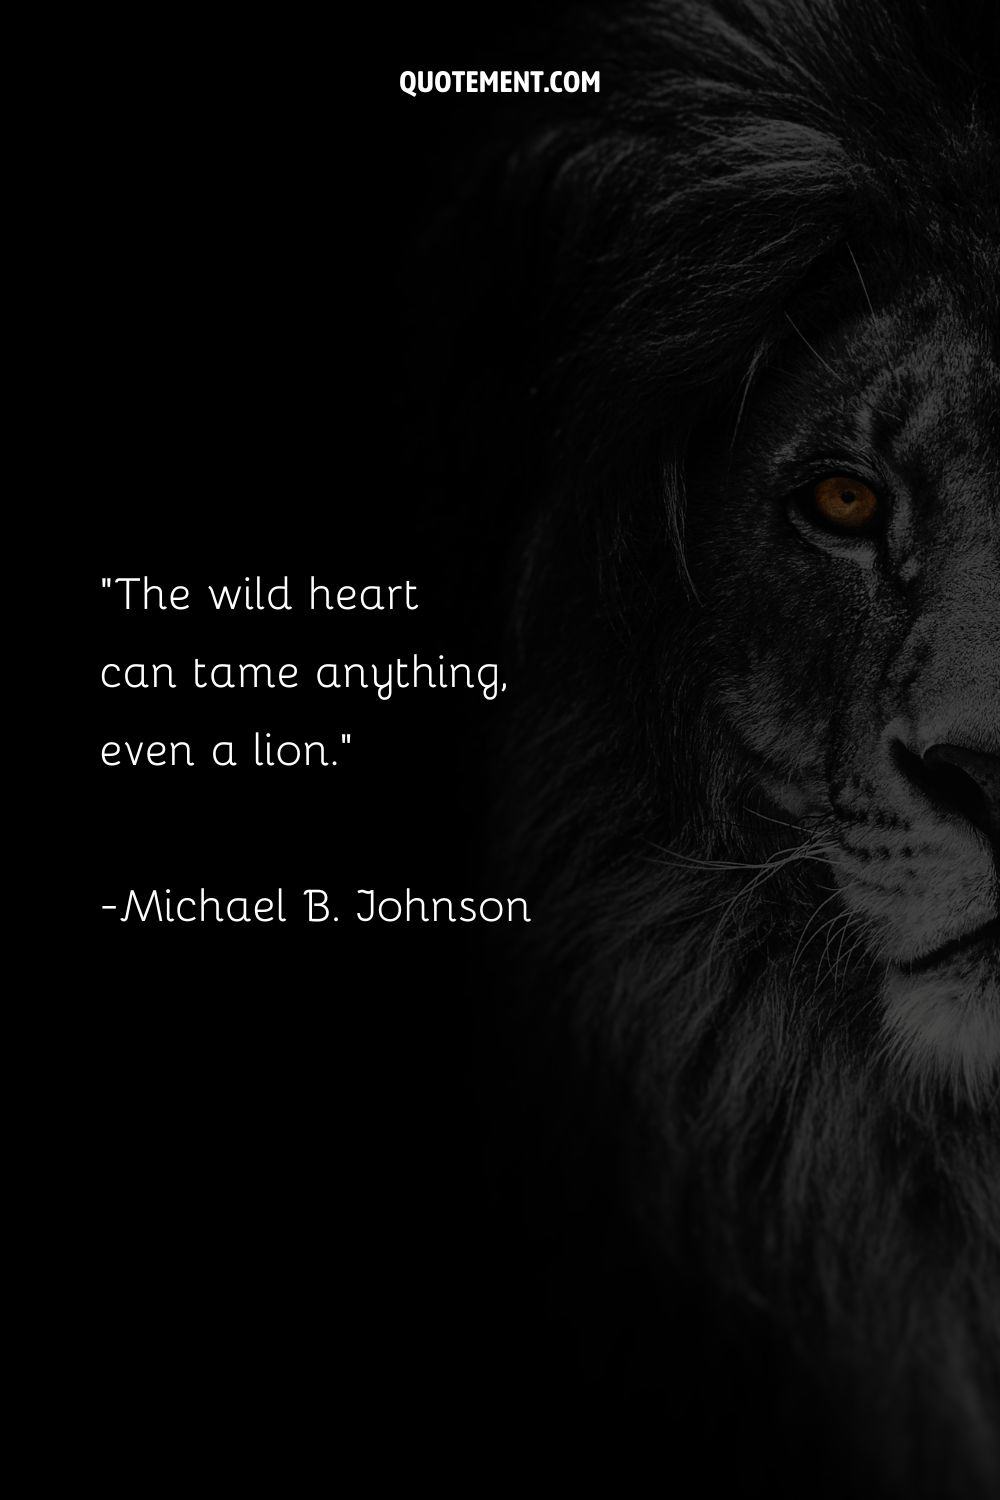 The wild heart can tame anything, even a lion.